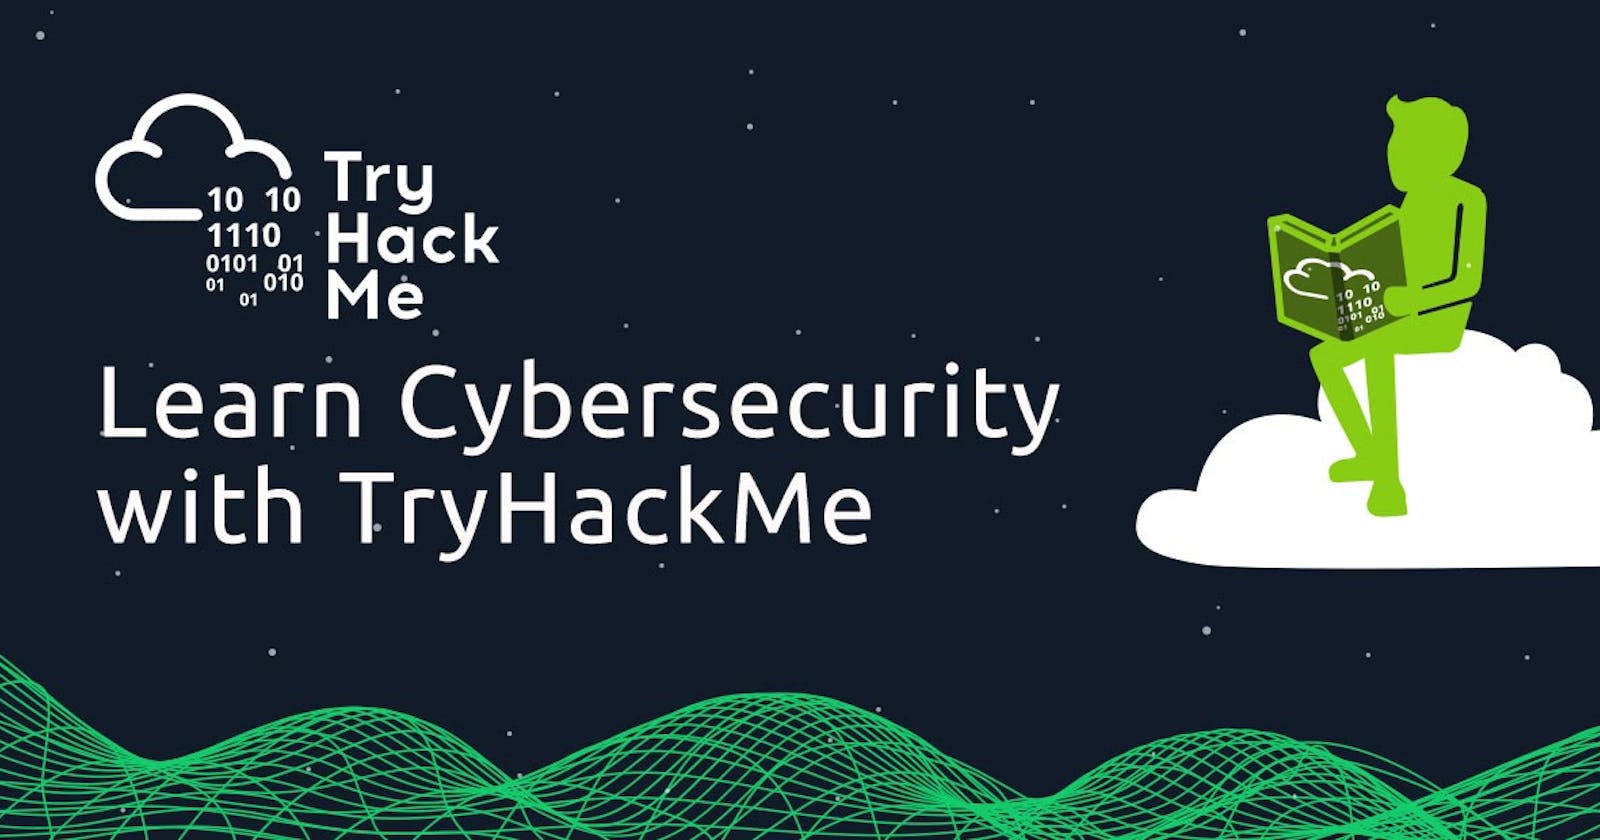 Getting Started with TryHackMe